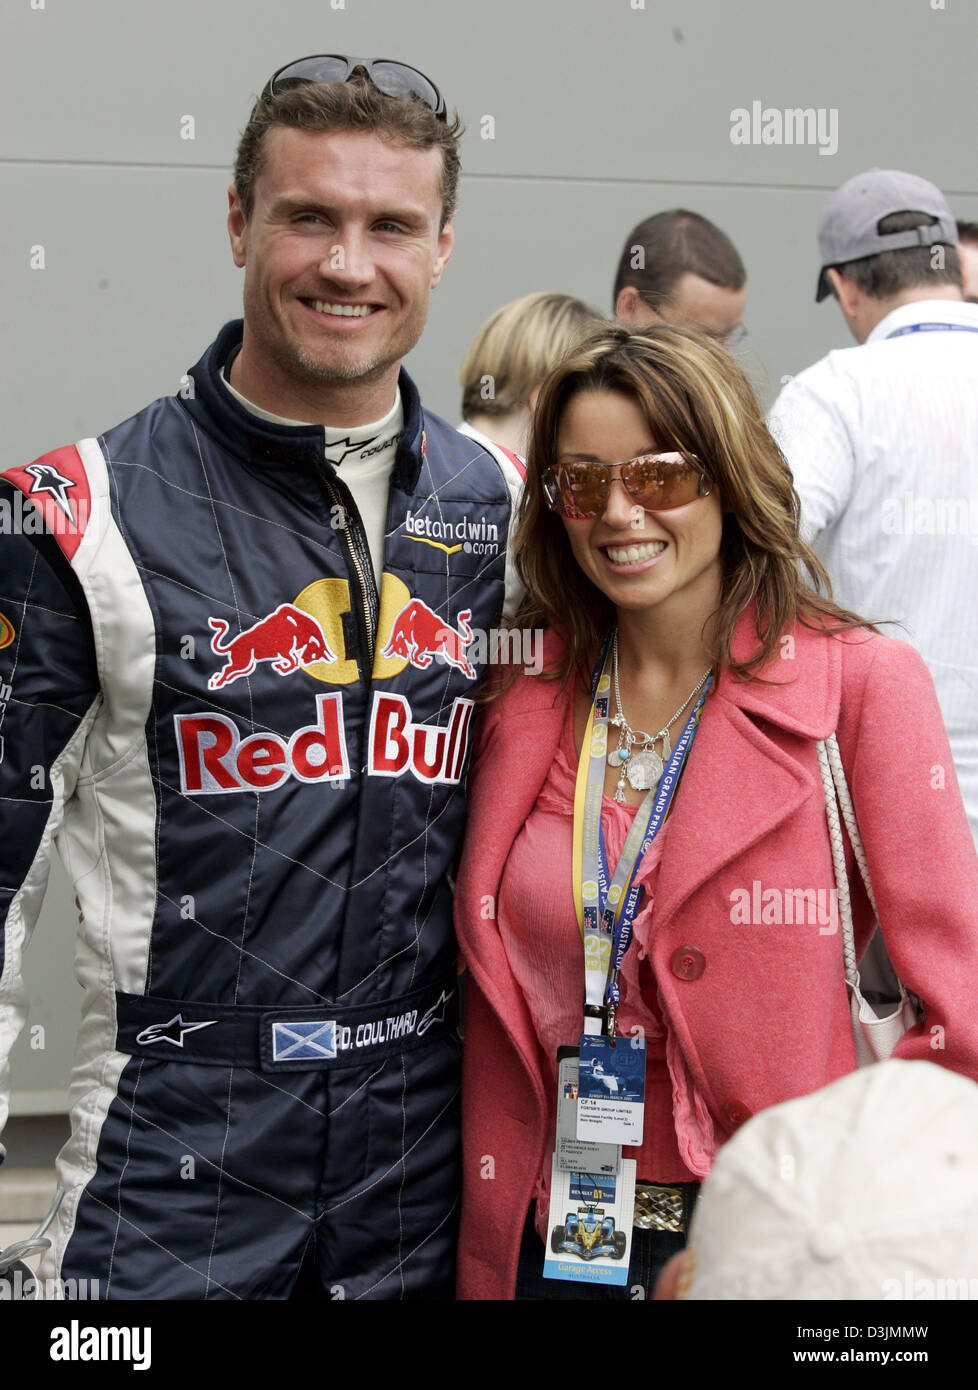 (dpa) - British Formula One driver David Coulthard (L) and Australian singer Dannii Minogue smile as they meet in the paddock at the Grand Prix circuit in Albert Park in Melbourne, Australia, 06 March 2005. He droped out of the the race after a collision with the German BMW-Williams driver Nick Heidfeld. Stock Photo